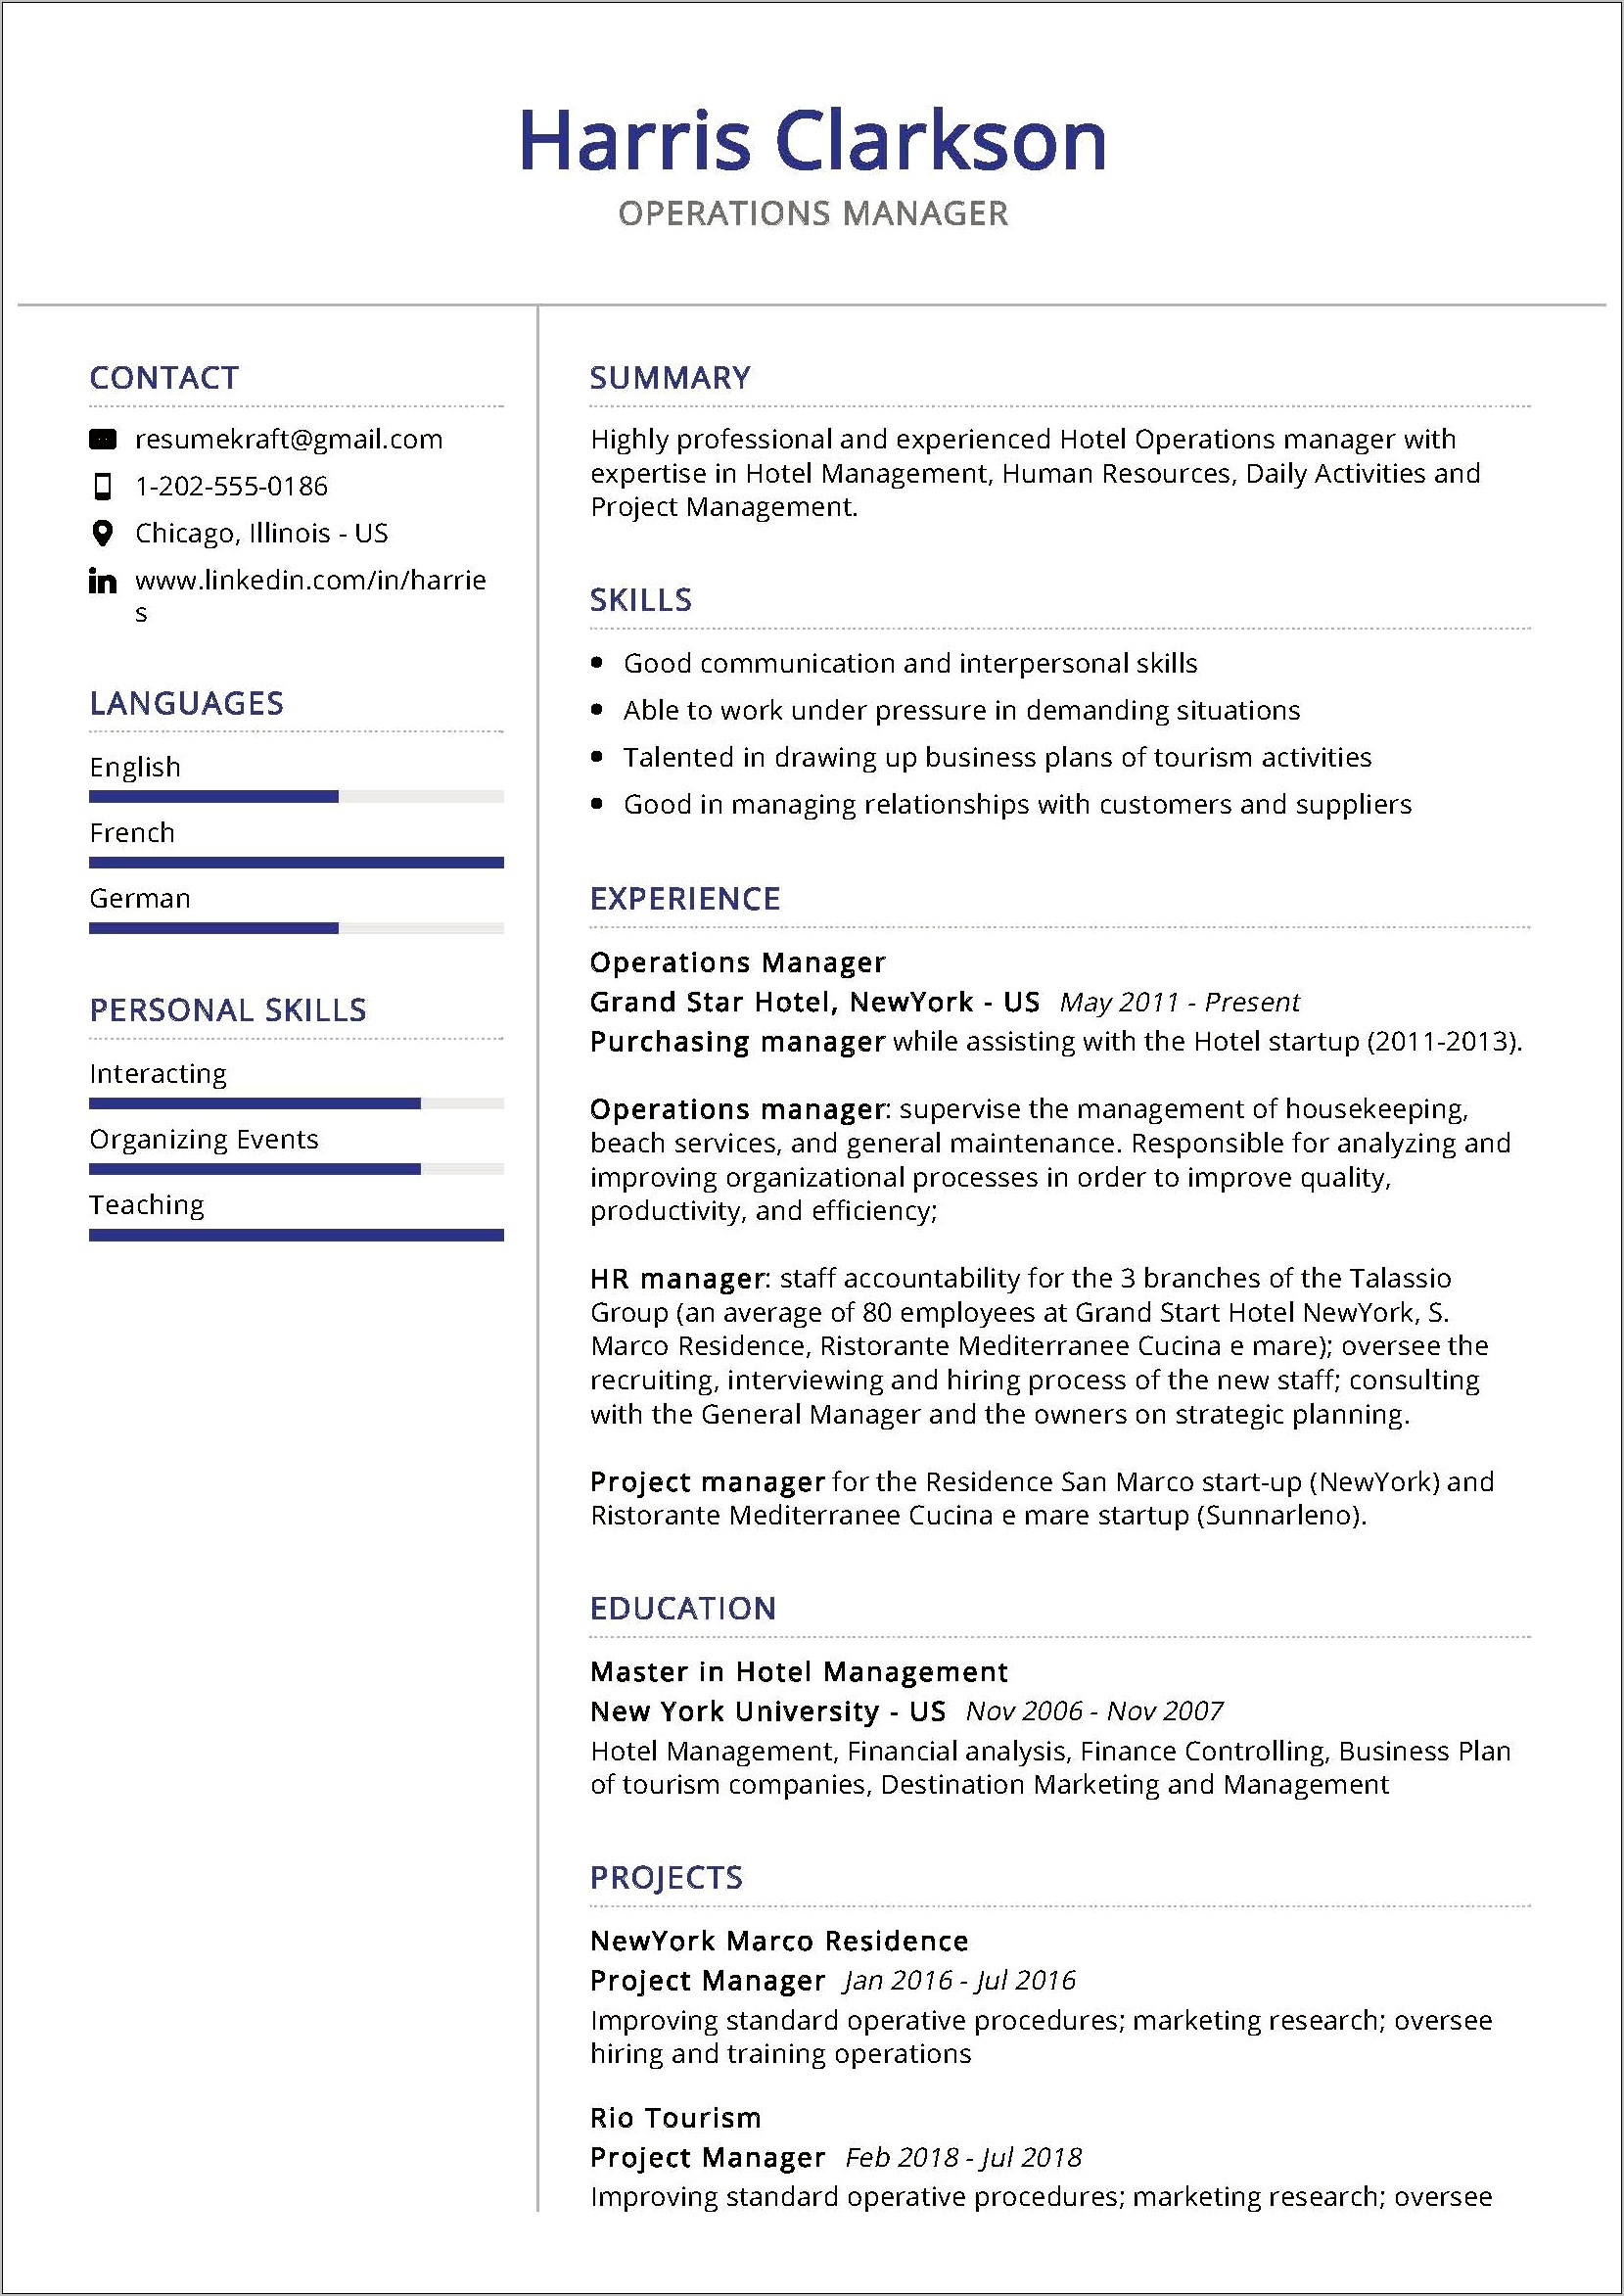 Food Service Area Manager Resume